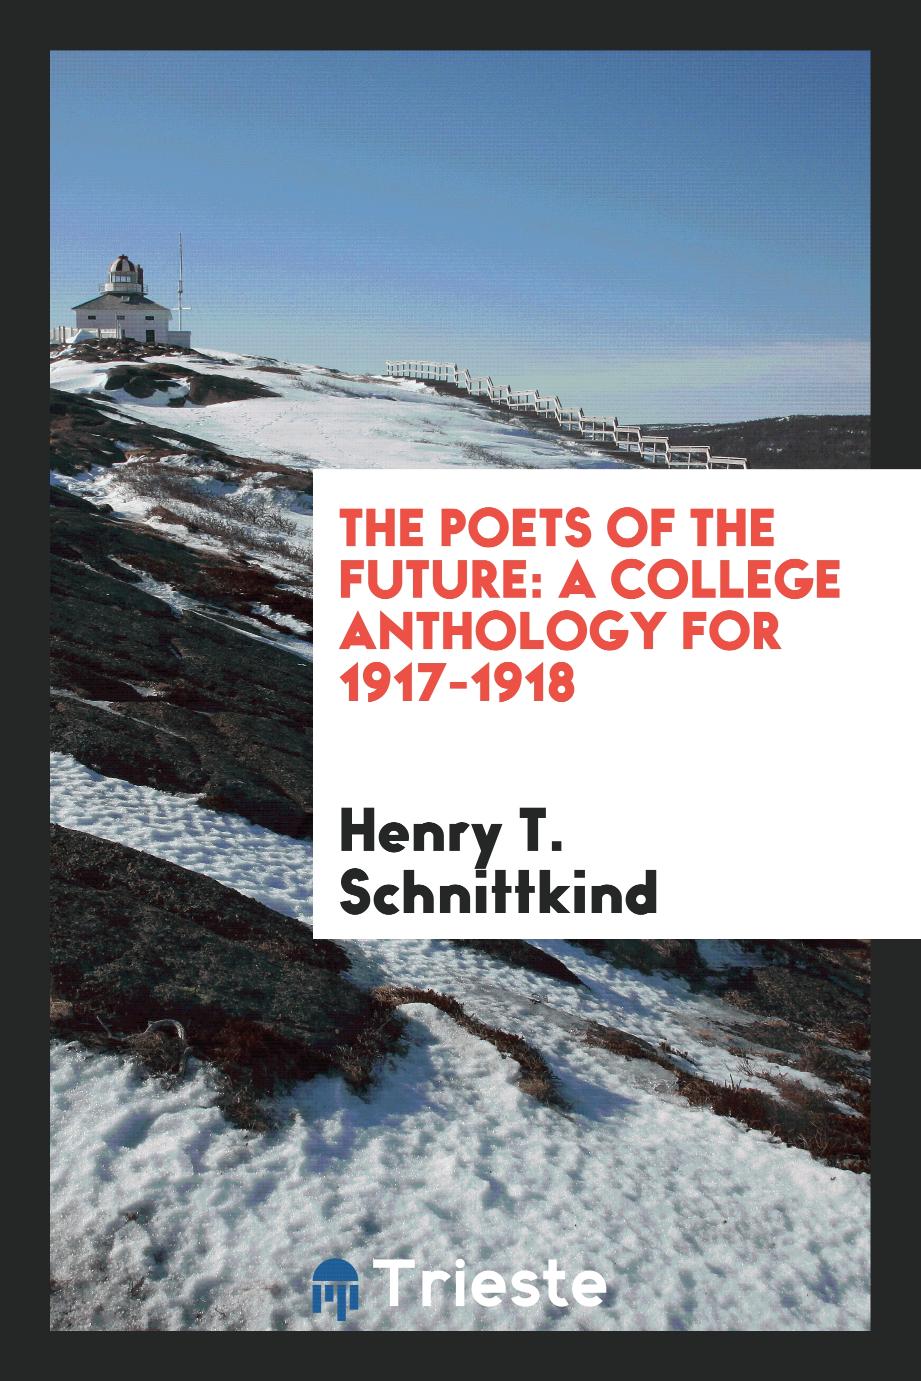 The Poets of the Future: A College Anthology for 1917-1918